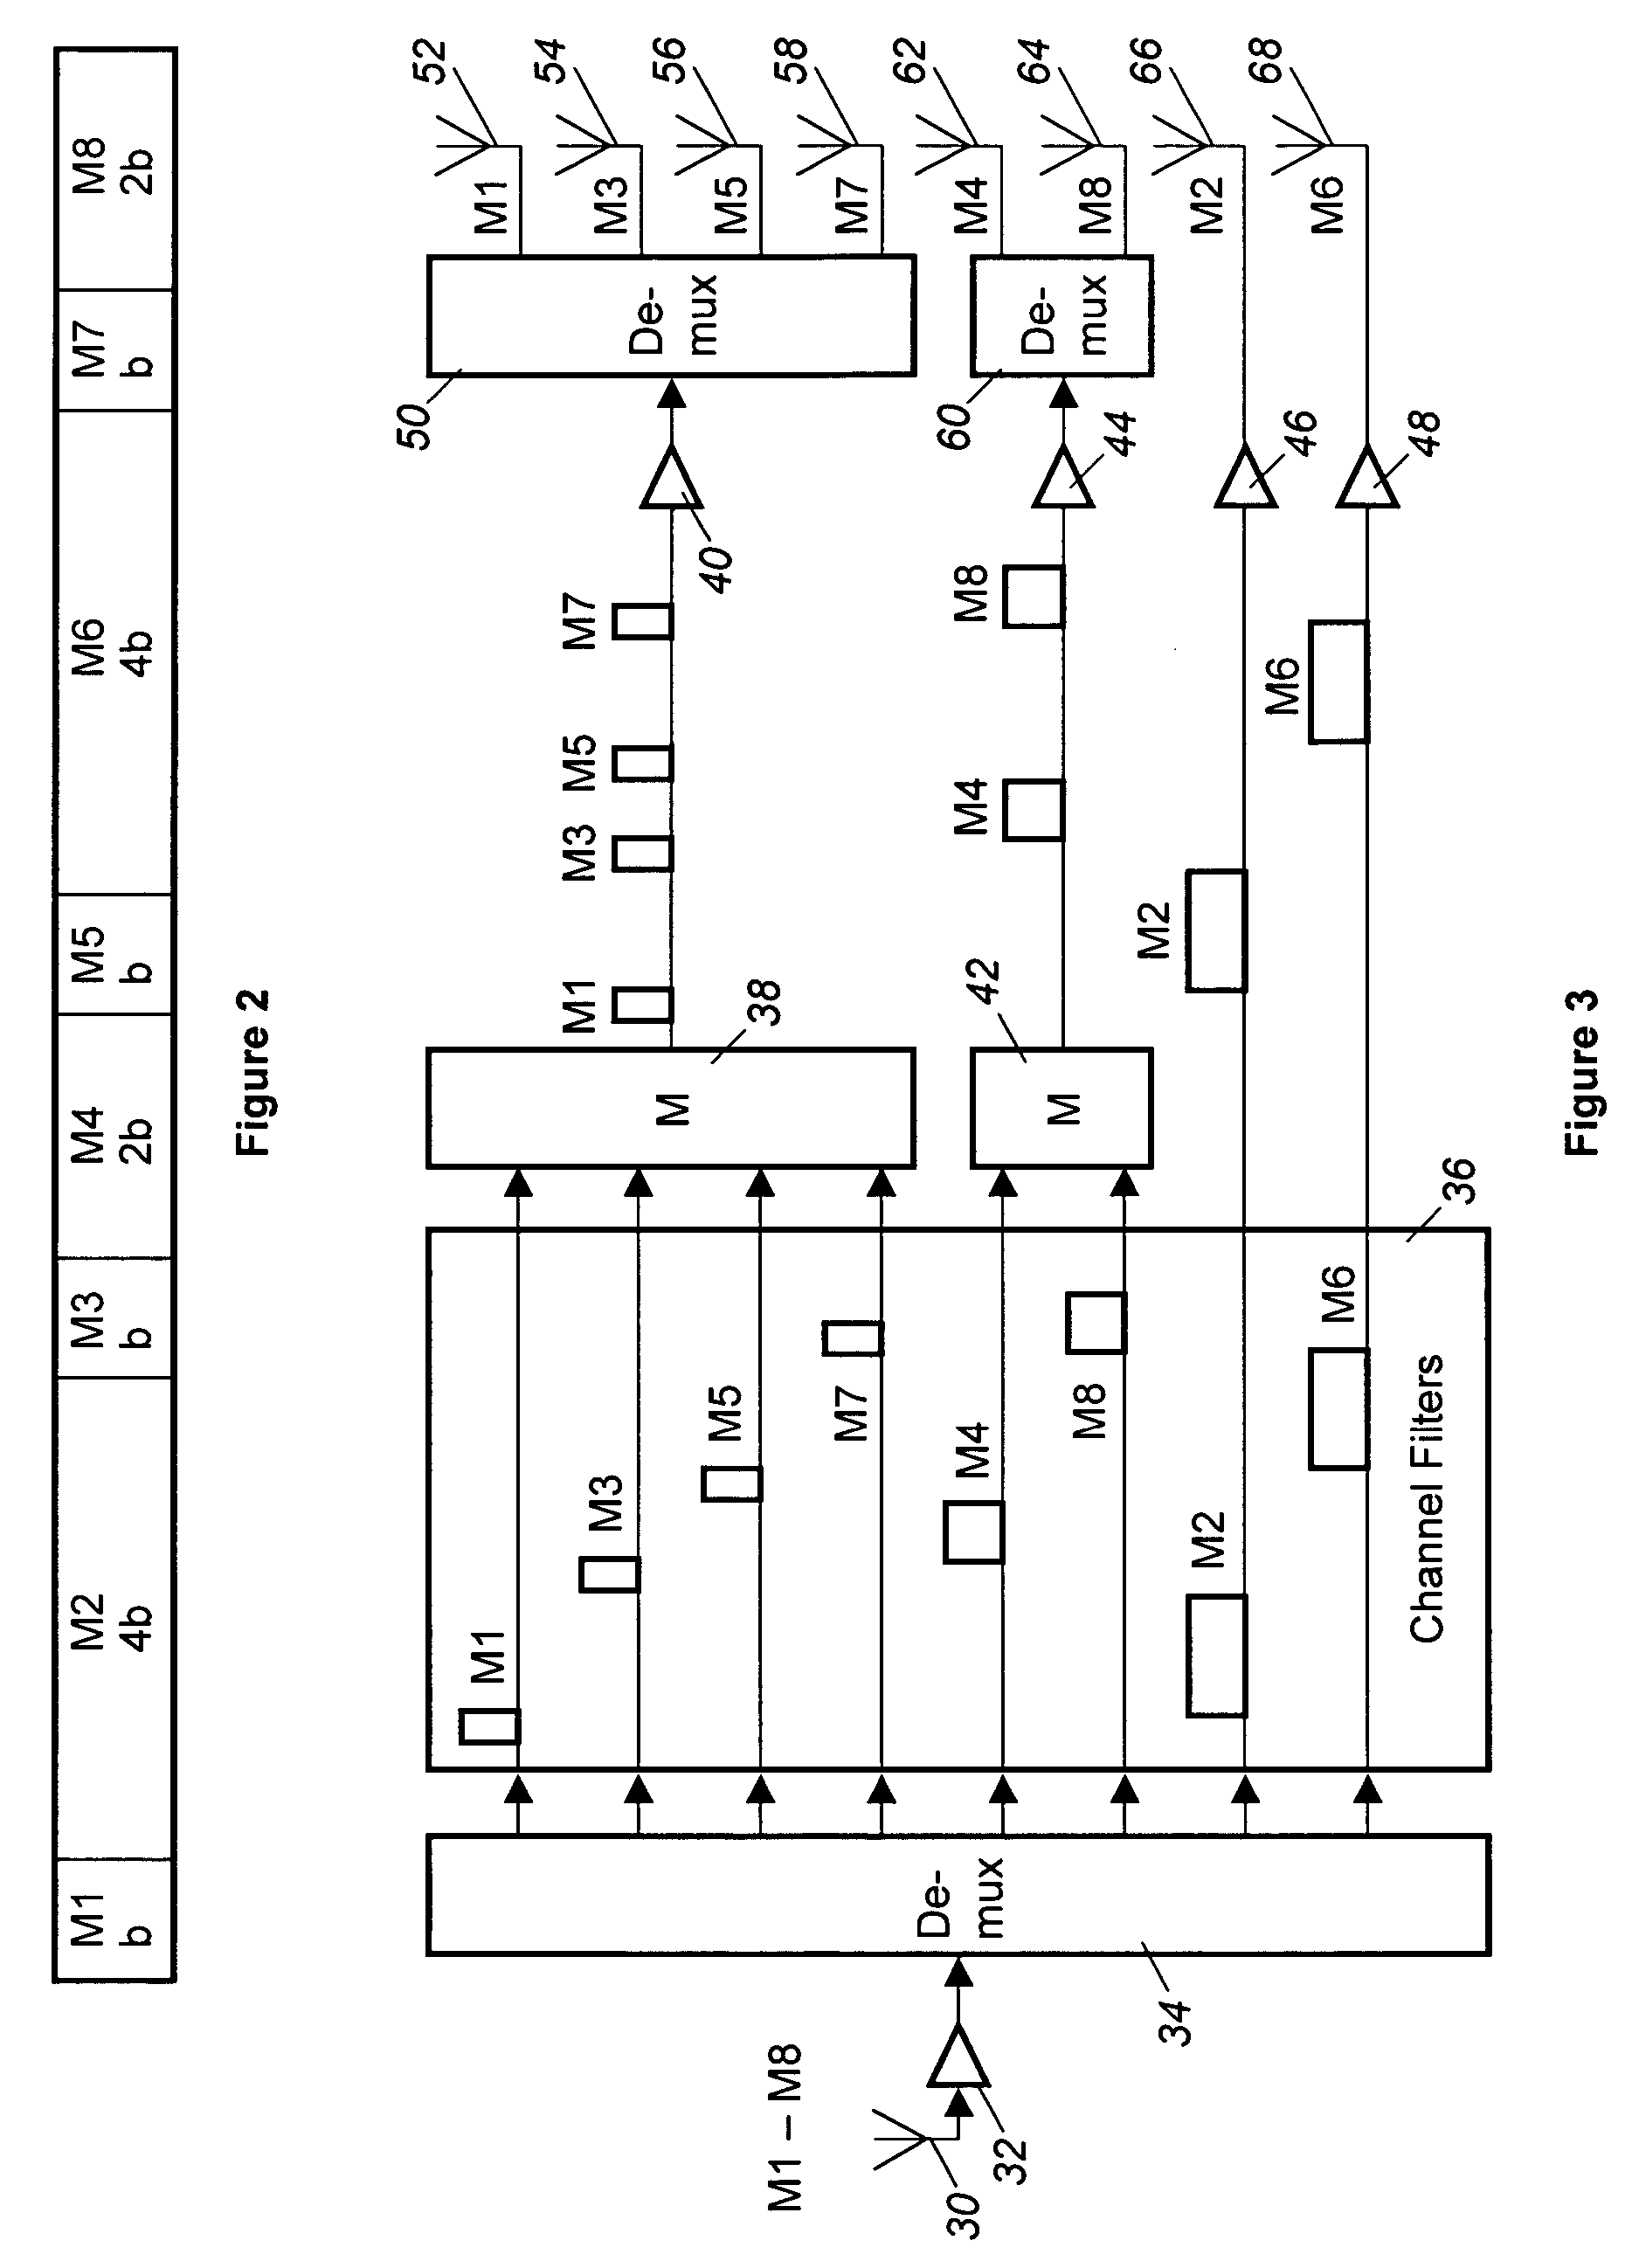 Signal processing apparatus and method, and communication system utilizing same